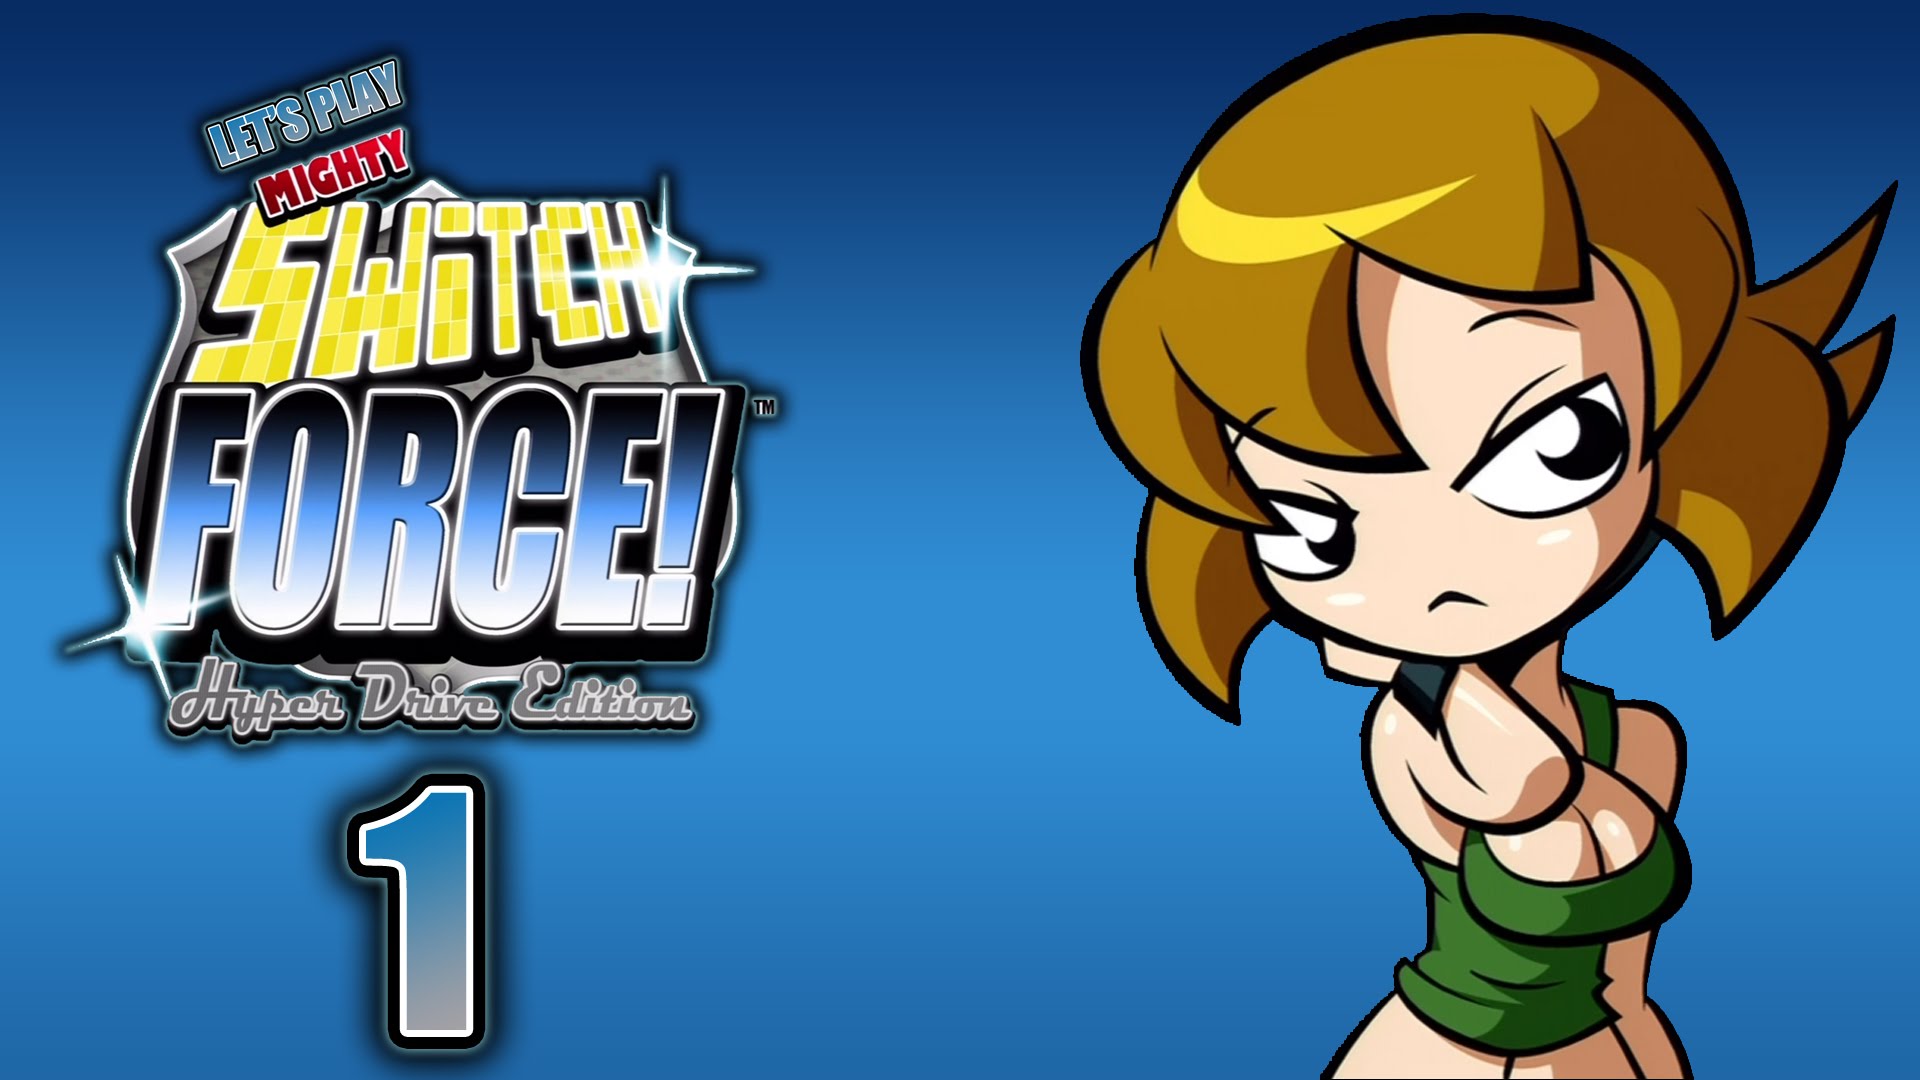 Mighty Switch Force! Hyper Drive Edition HD wallpapers, Desktop wallpaper - most viewed